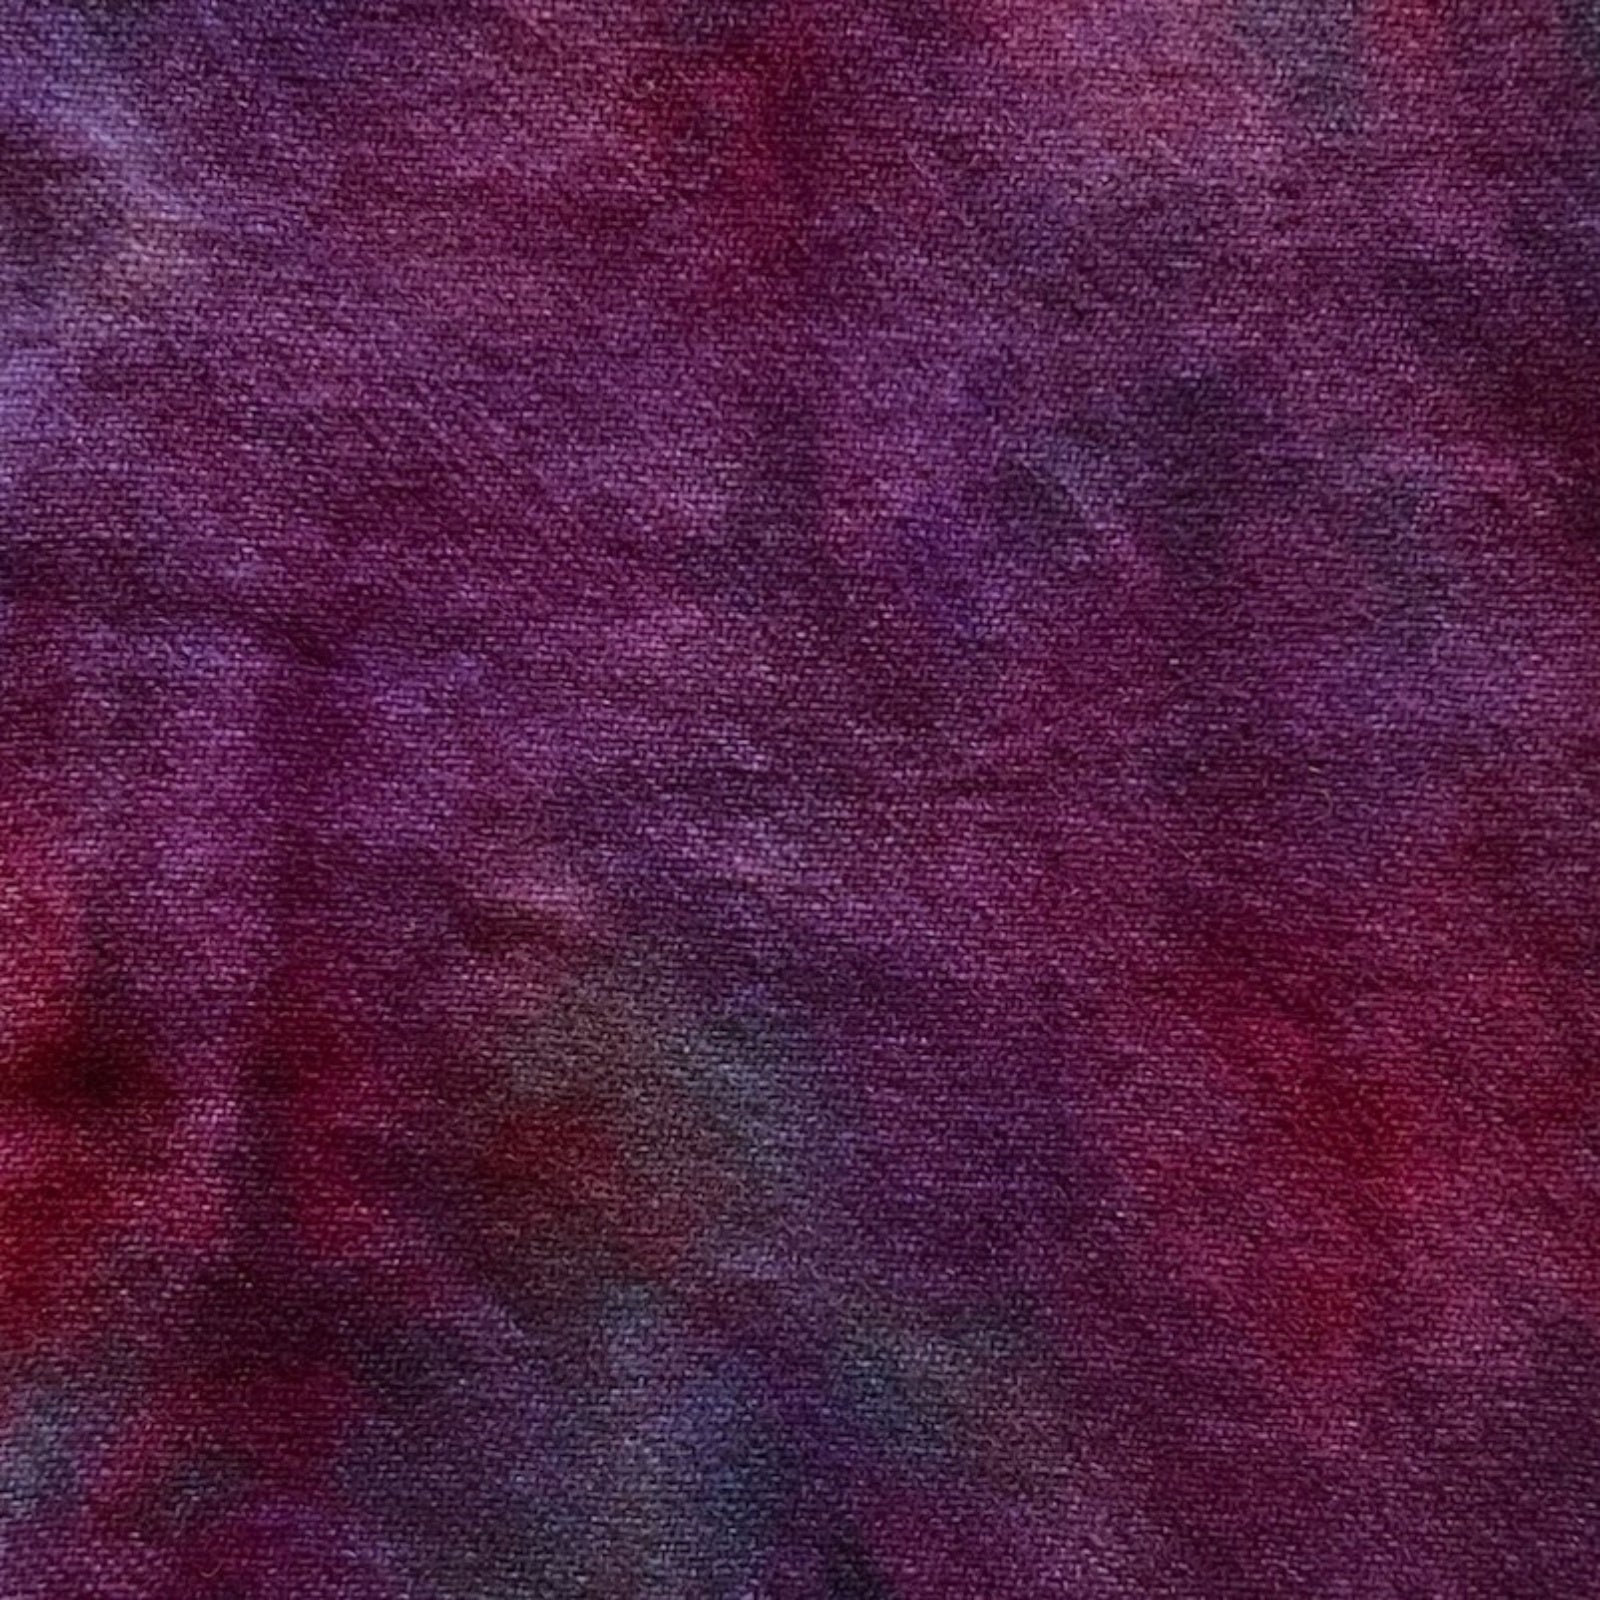 Wow - Colorama Hand Dyed Wool - Offered by HoneyBee Hive Rug Hooking